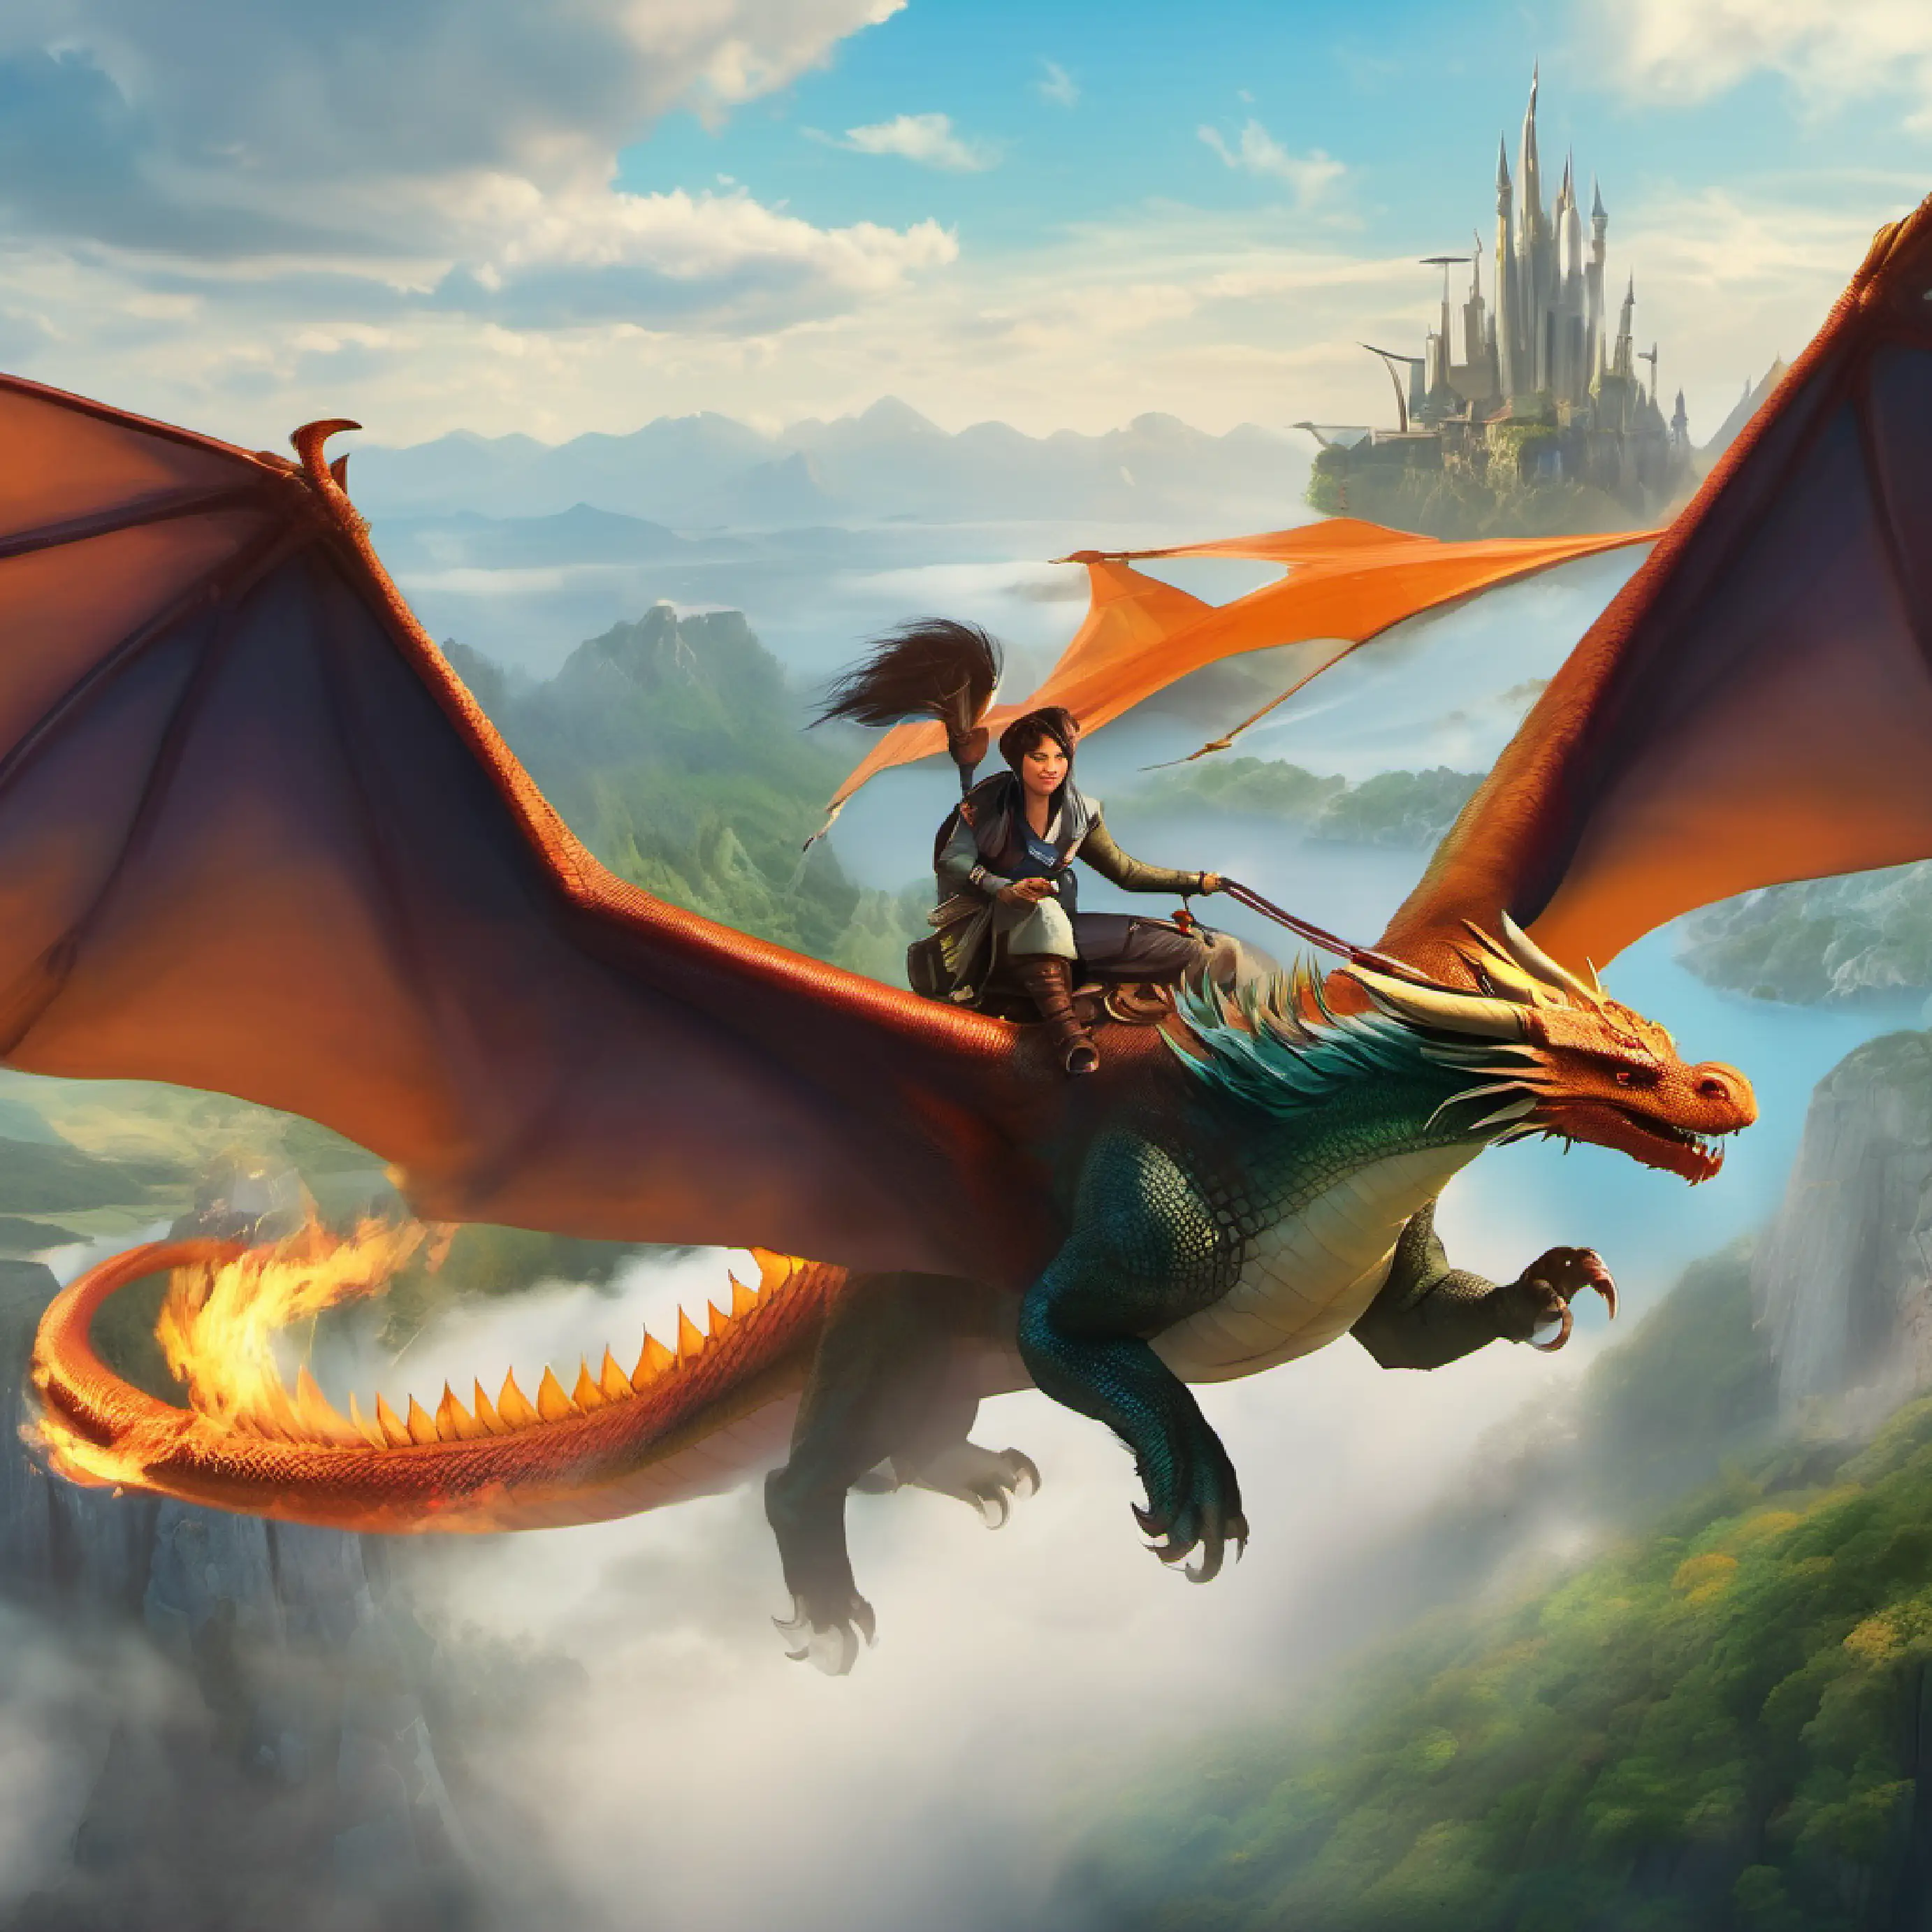 Alexis begins the adventure by flying with the dragon.